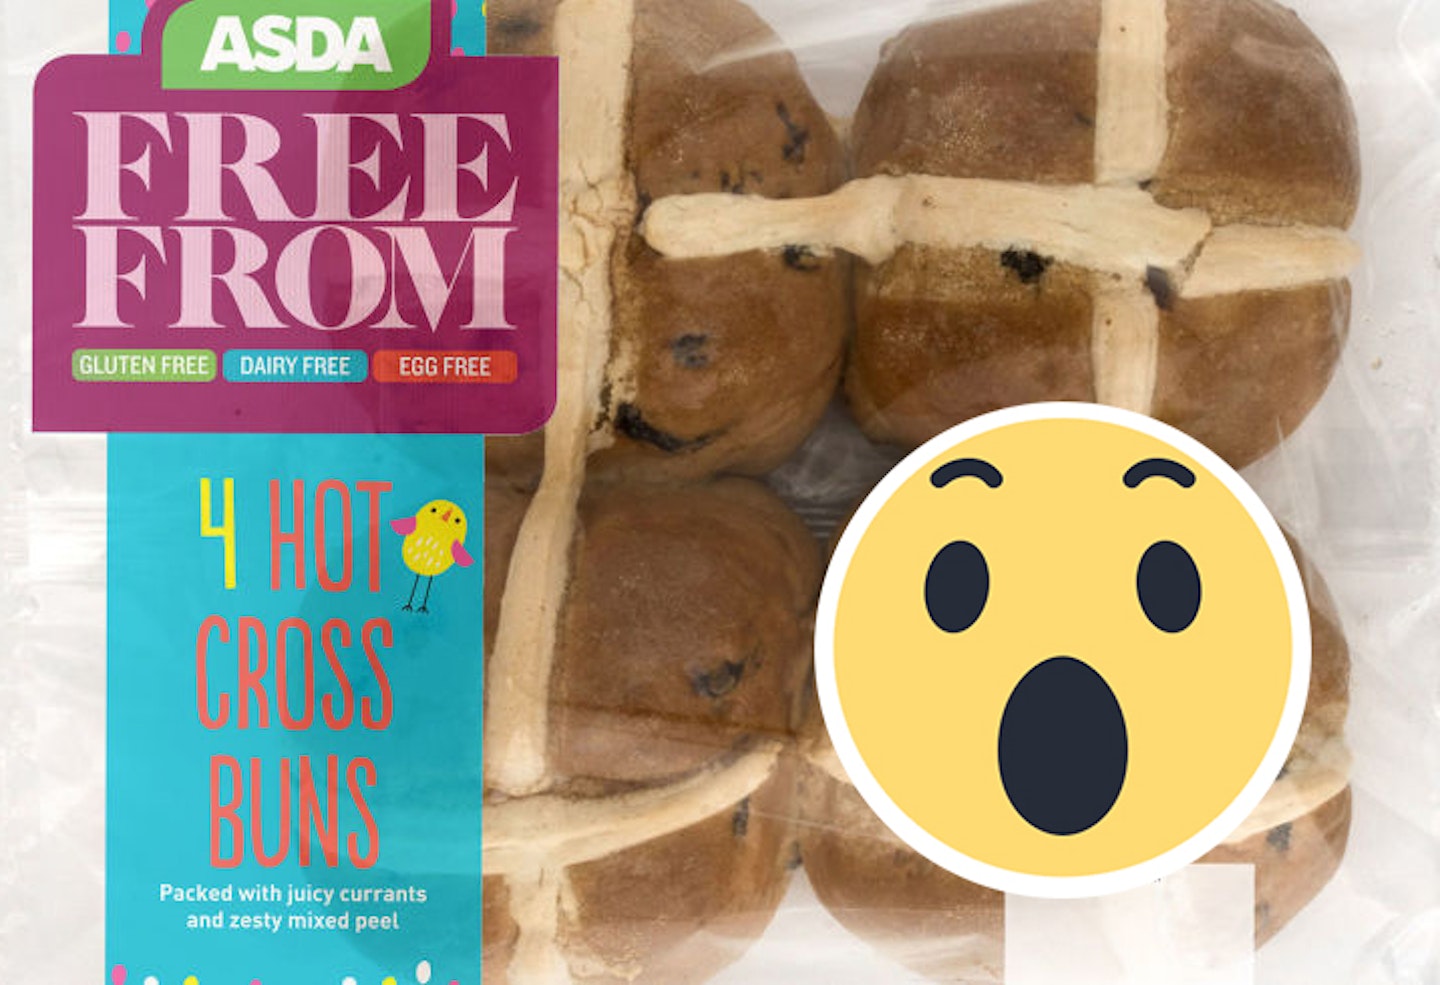 Asda have launched GLUTEN-FREE, DAIRY-FREE, vegan hot cross buns for Easter!